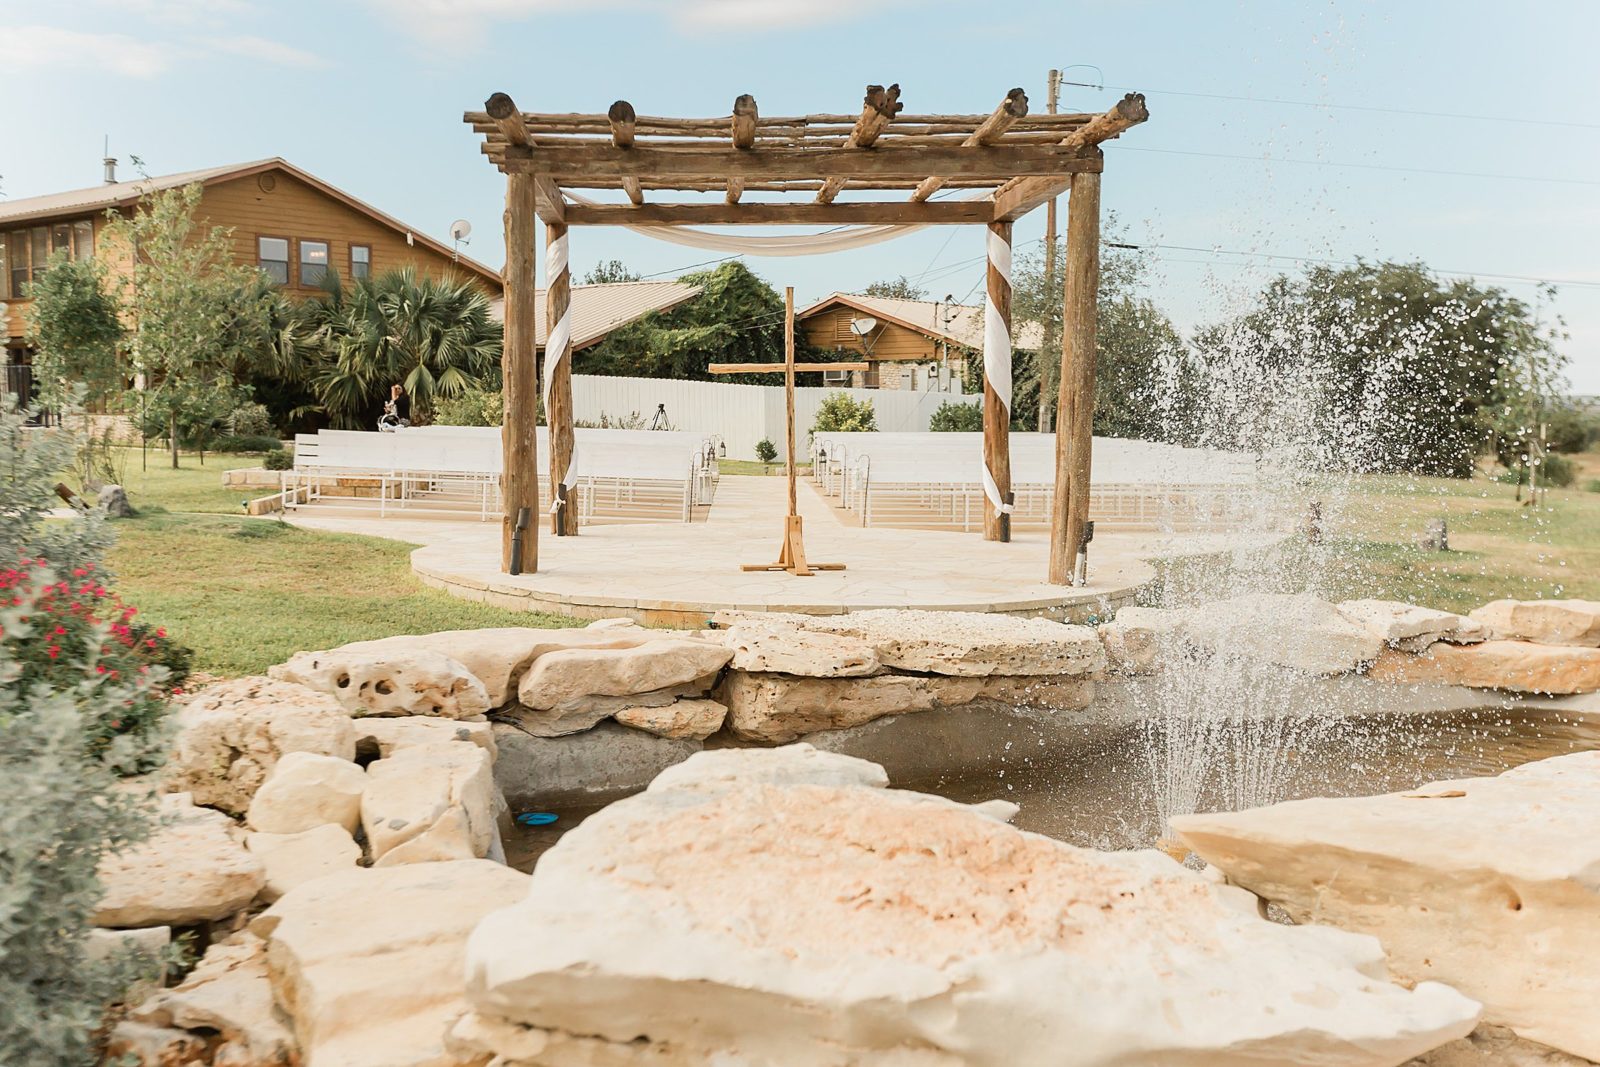 A Lavender and Blush Wedding in Dripping Springs, Texas, by Anna Kay Photography